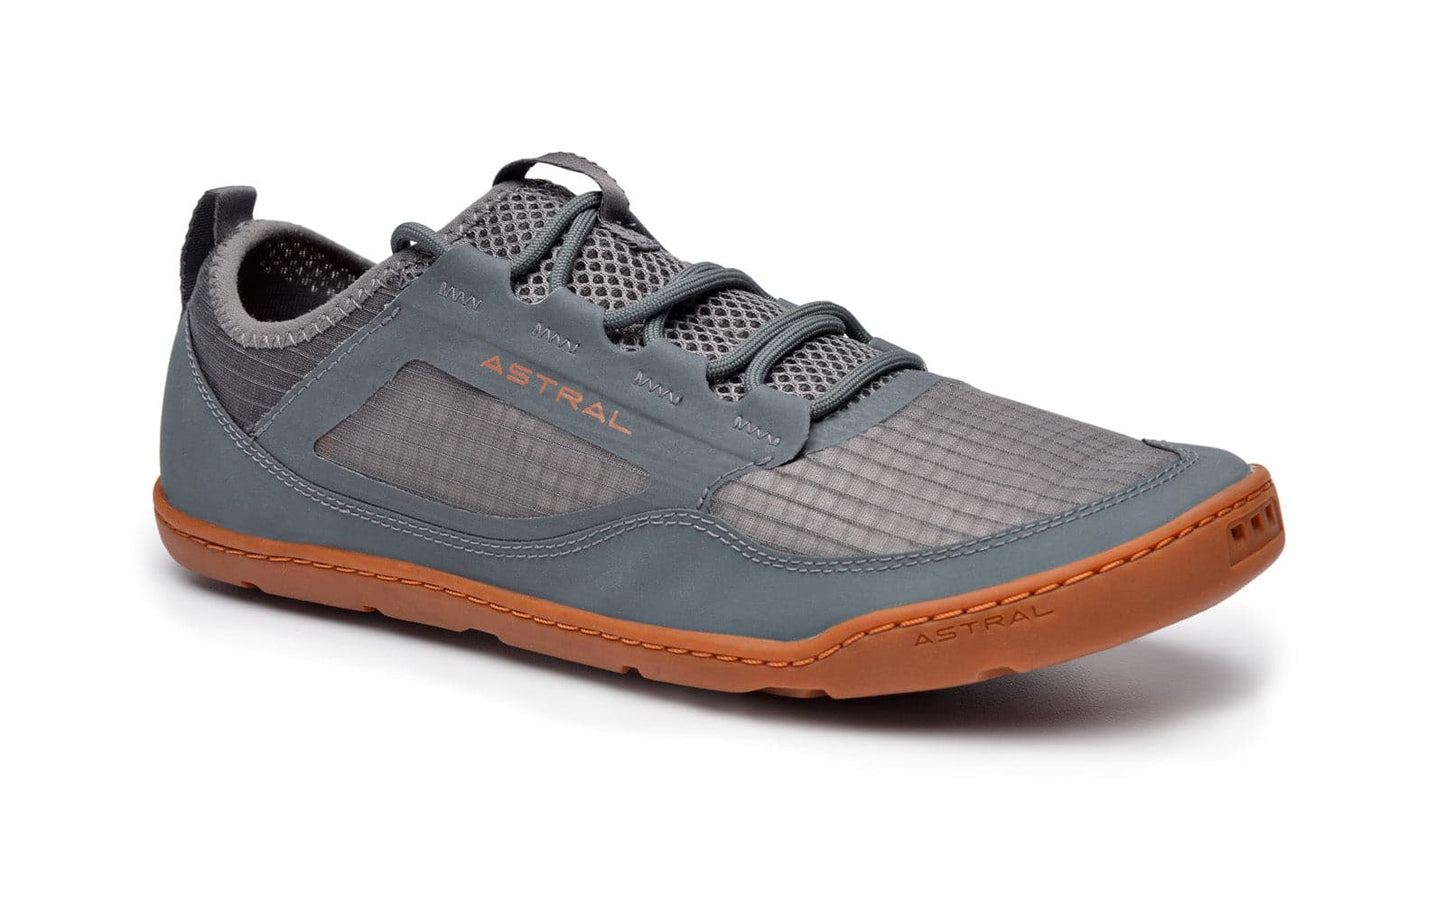 Featuring the Loyak AC - Men's men's footwear manufactured by Astral shown here from a second angle.